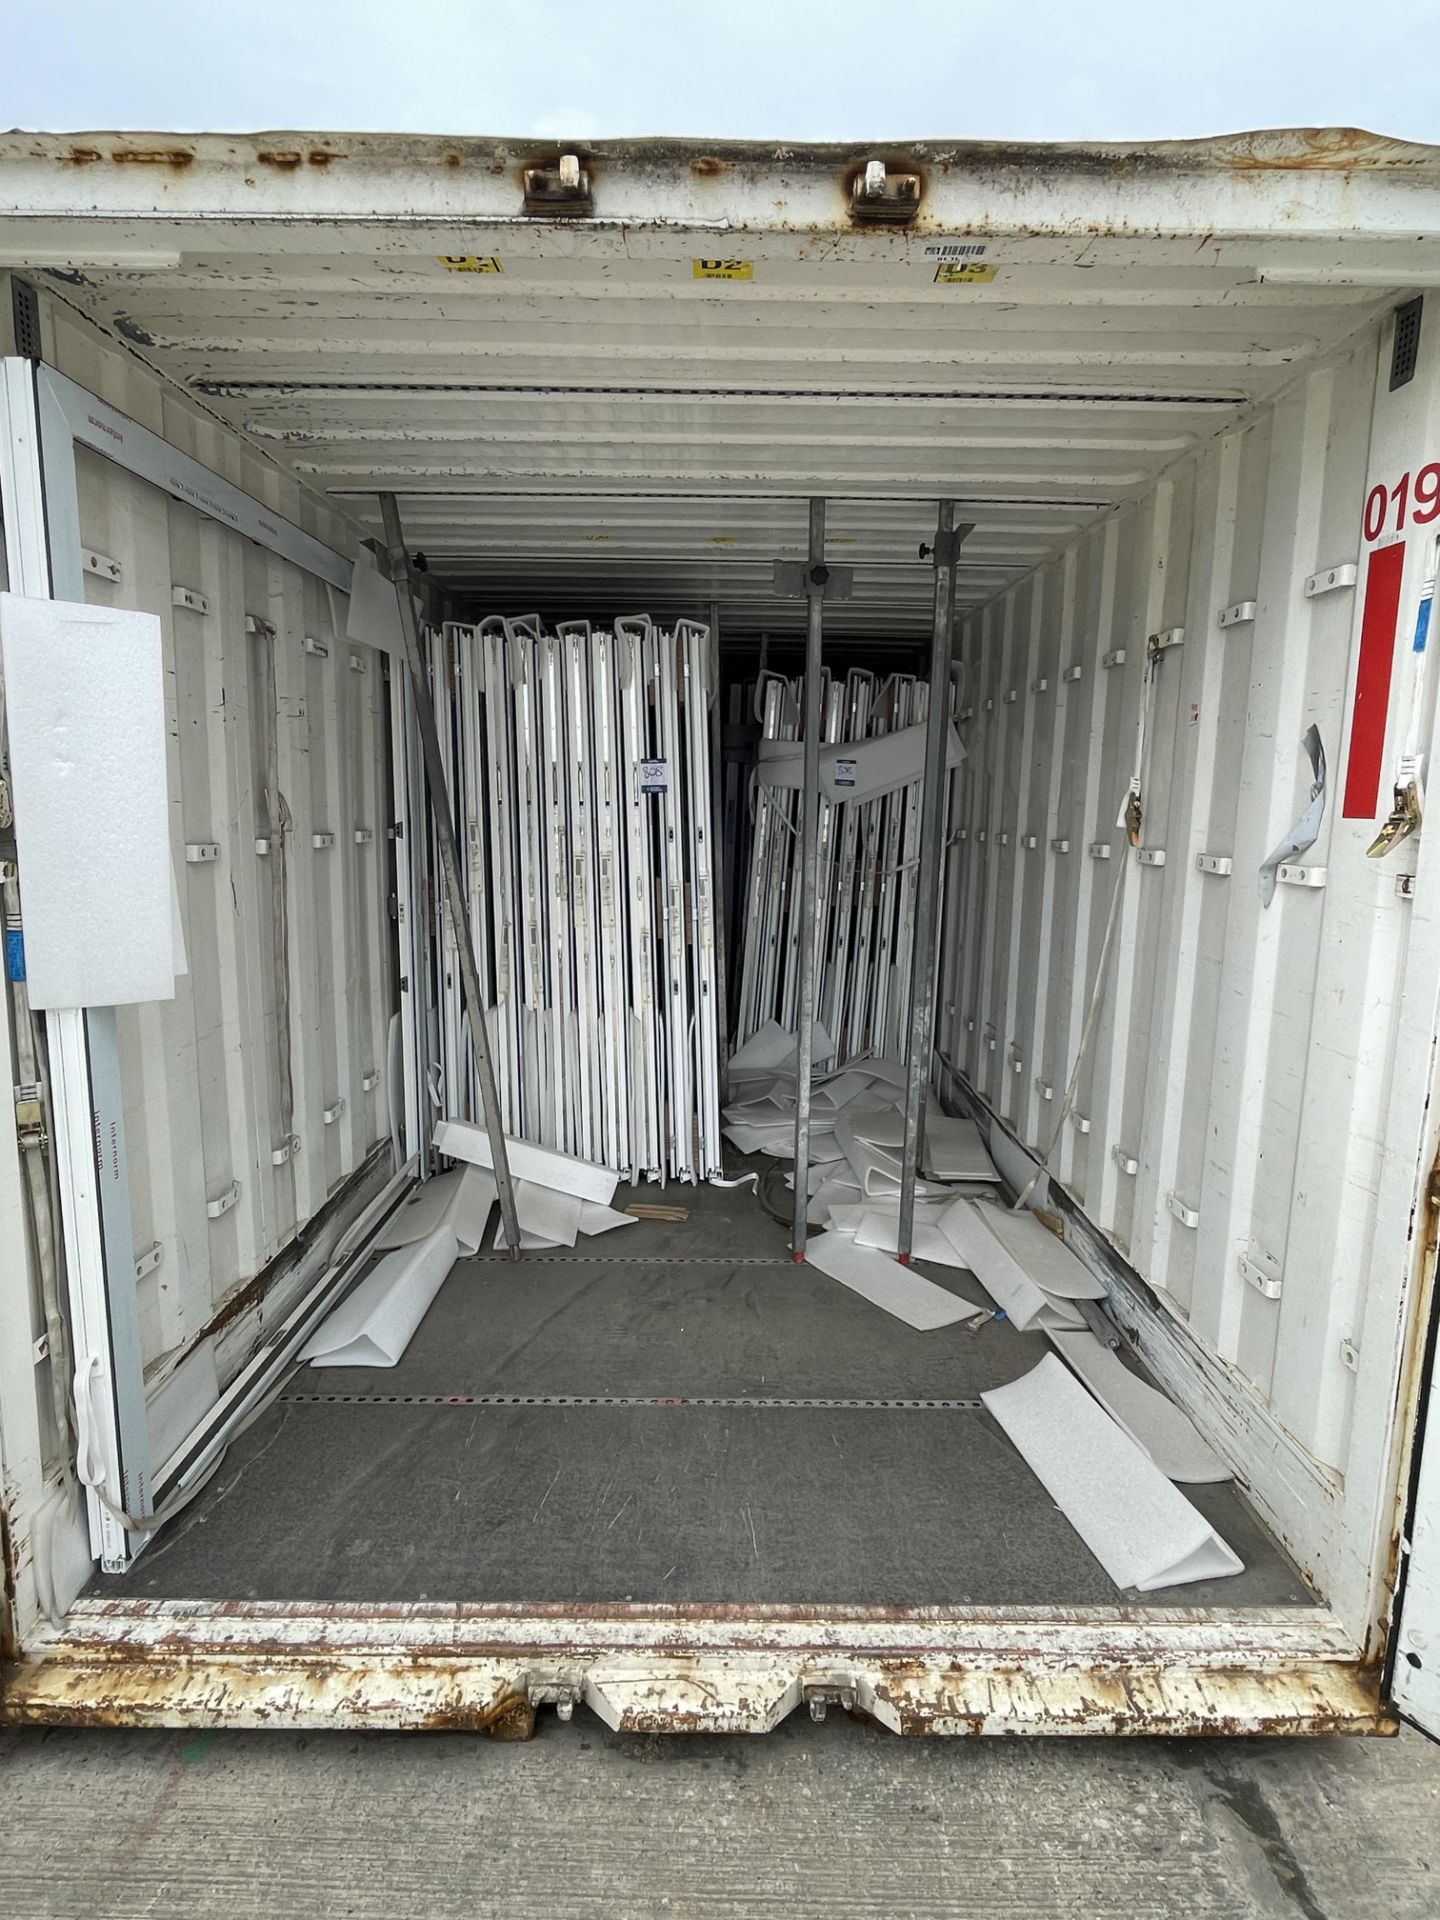 Contents of Container "1019" to Include Large Qty of Various Internorm Tour-Nr. 071 Glass Doors